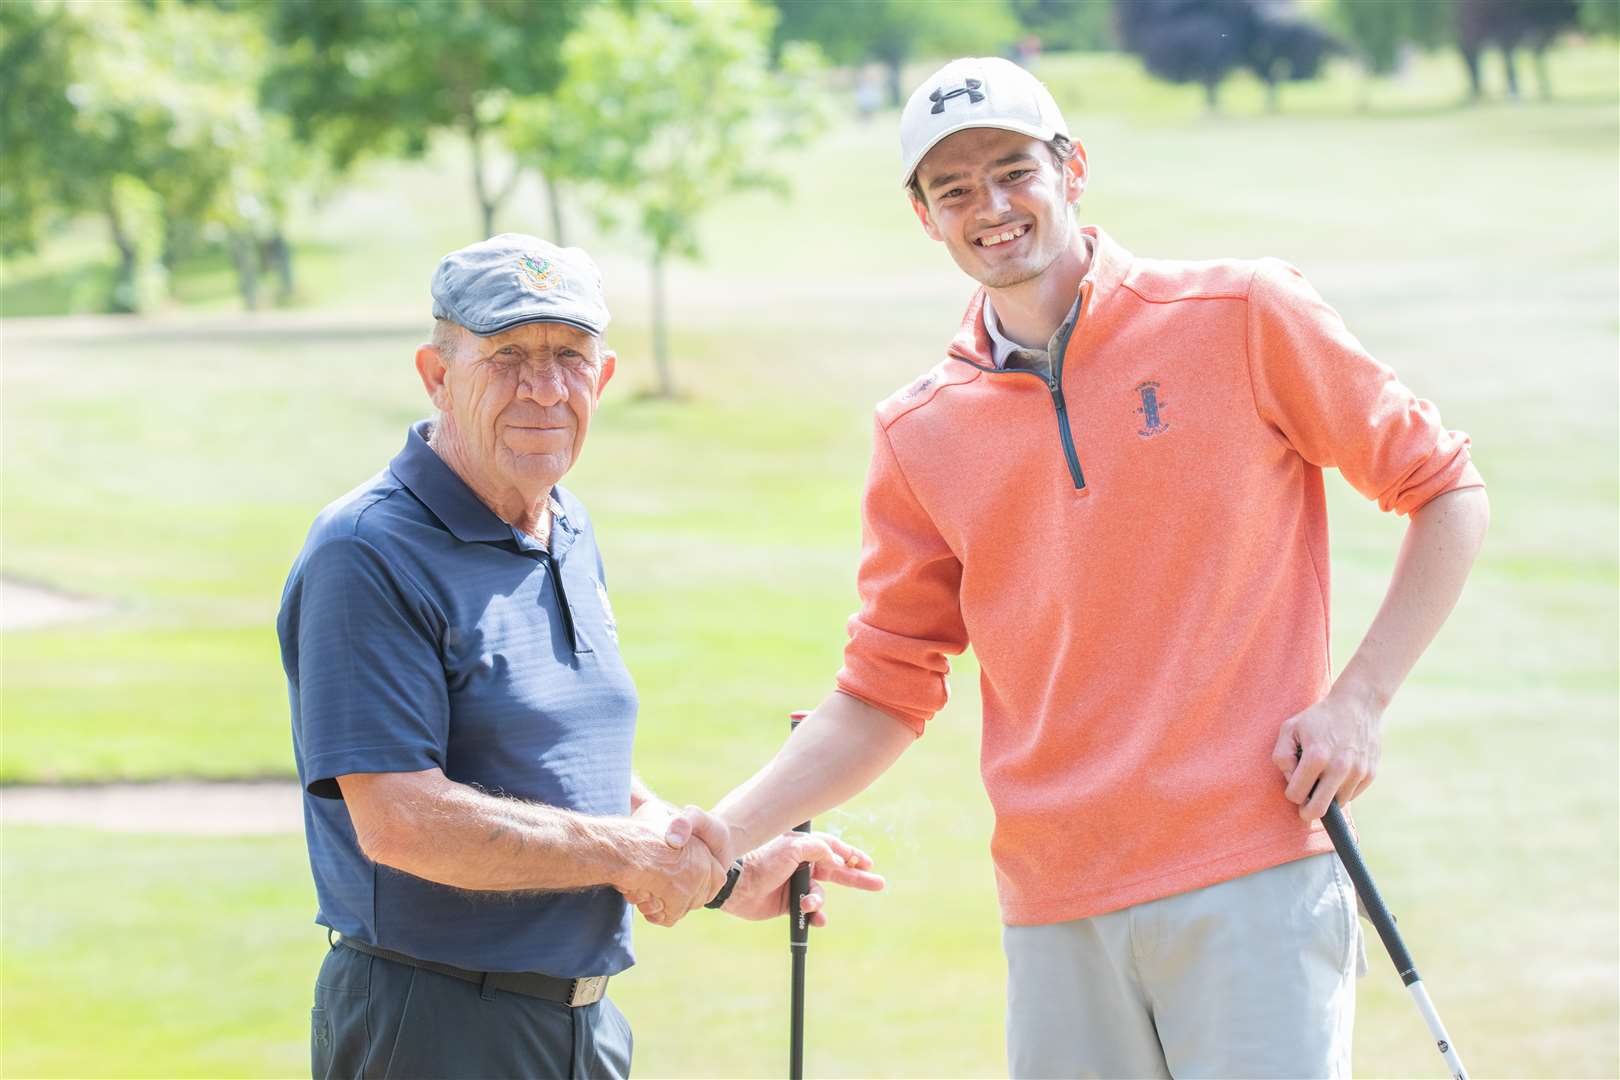 The oldest and youngest players were drawn together in the Grant Cup. 72-year-old Albert Duffus and 18-year-old William Stephen. Picture: Daniel Forsyth..